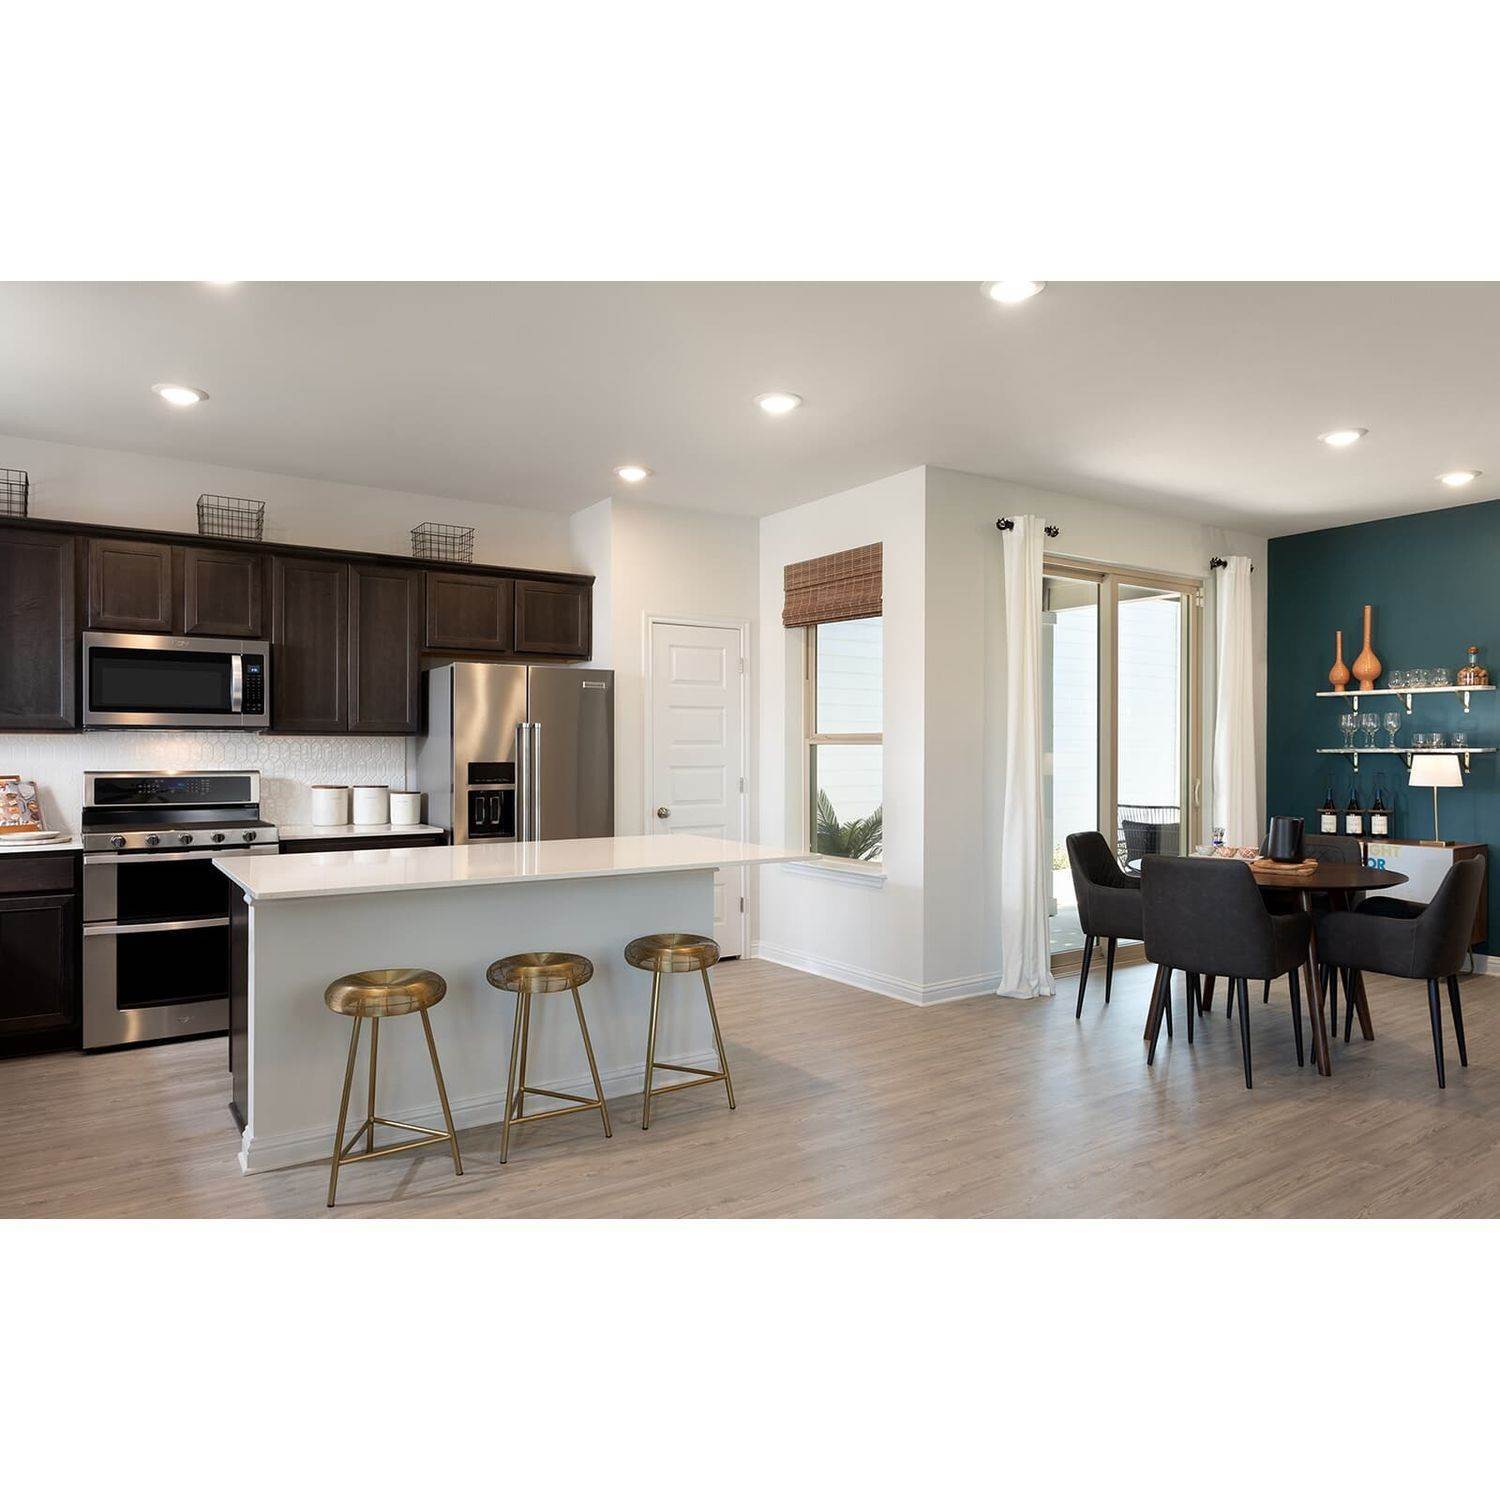 3. Urban Homes Collection at Easton Park building at 7708 Skytree Drive, Southeast Austin, Austin, TX 78744